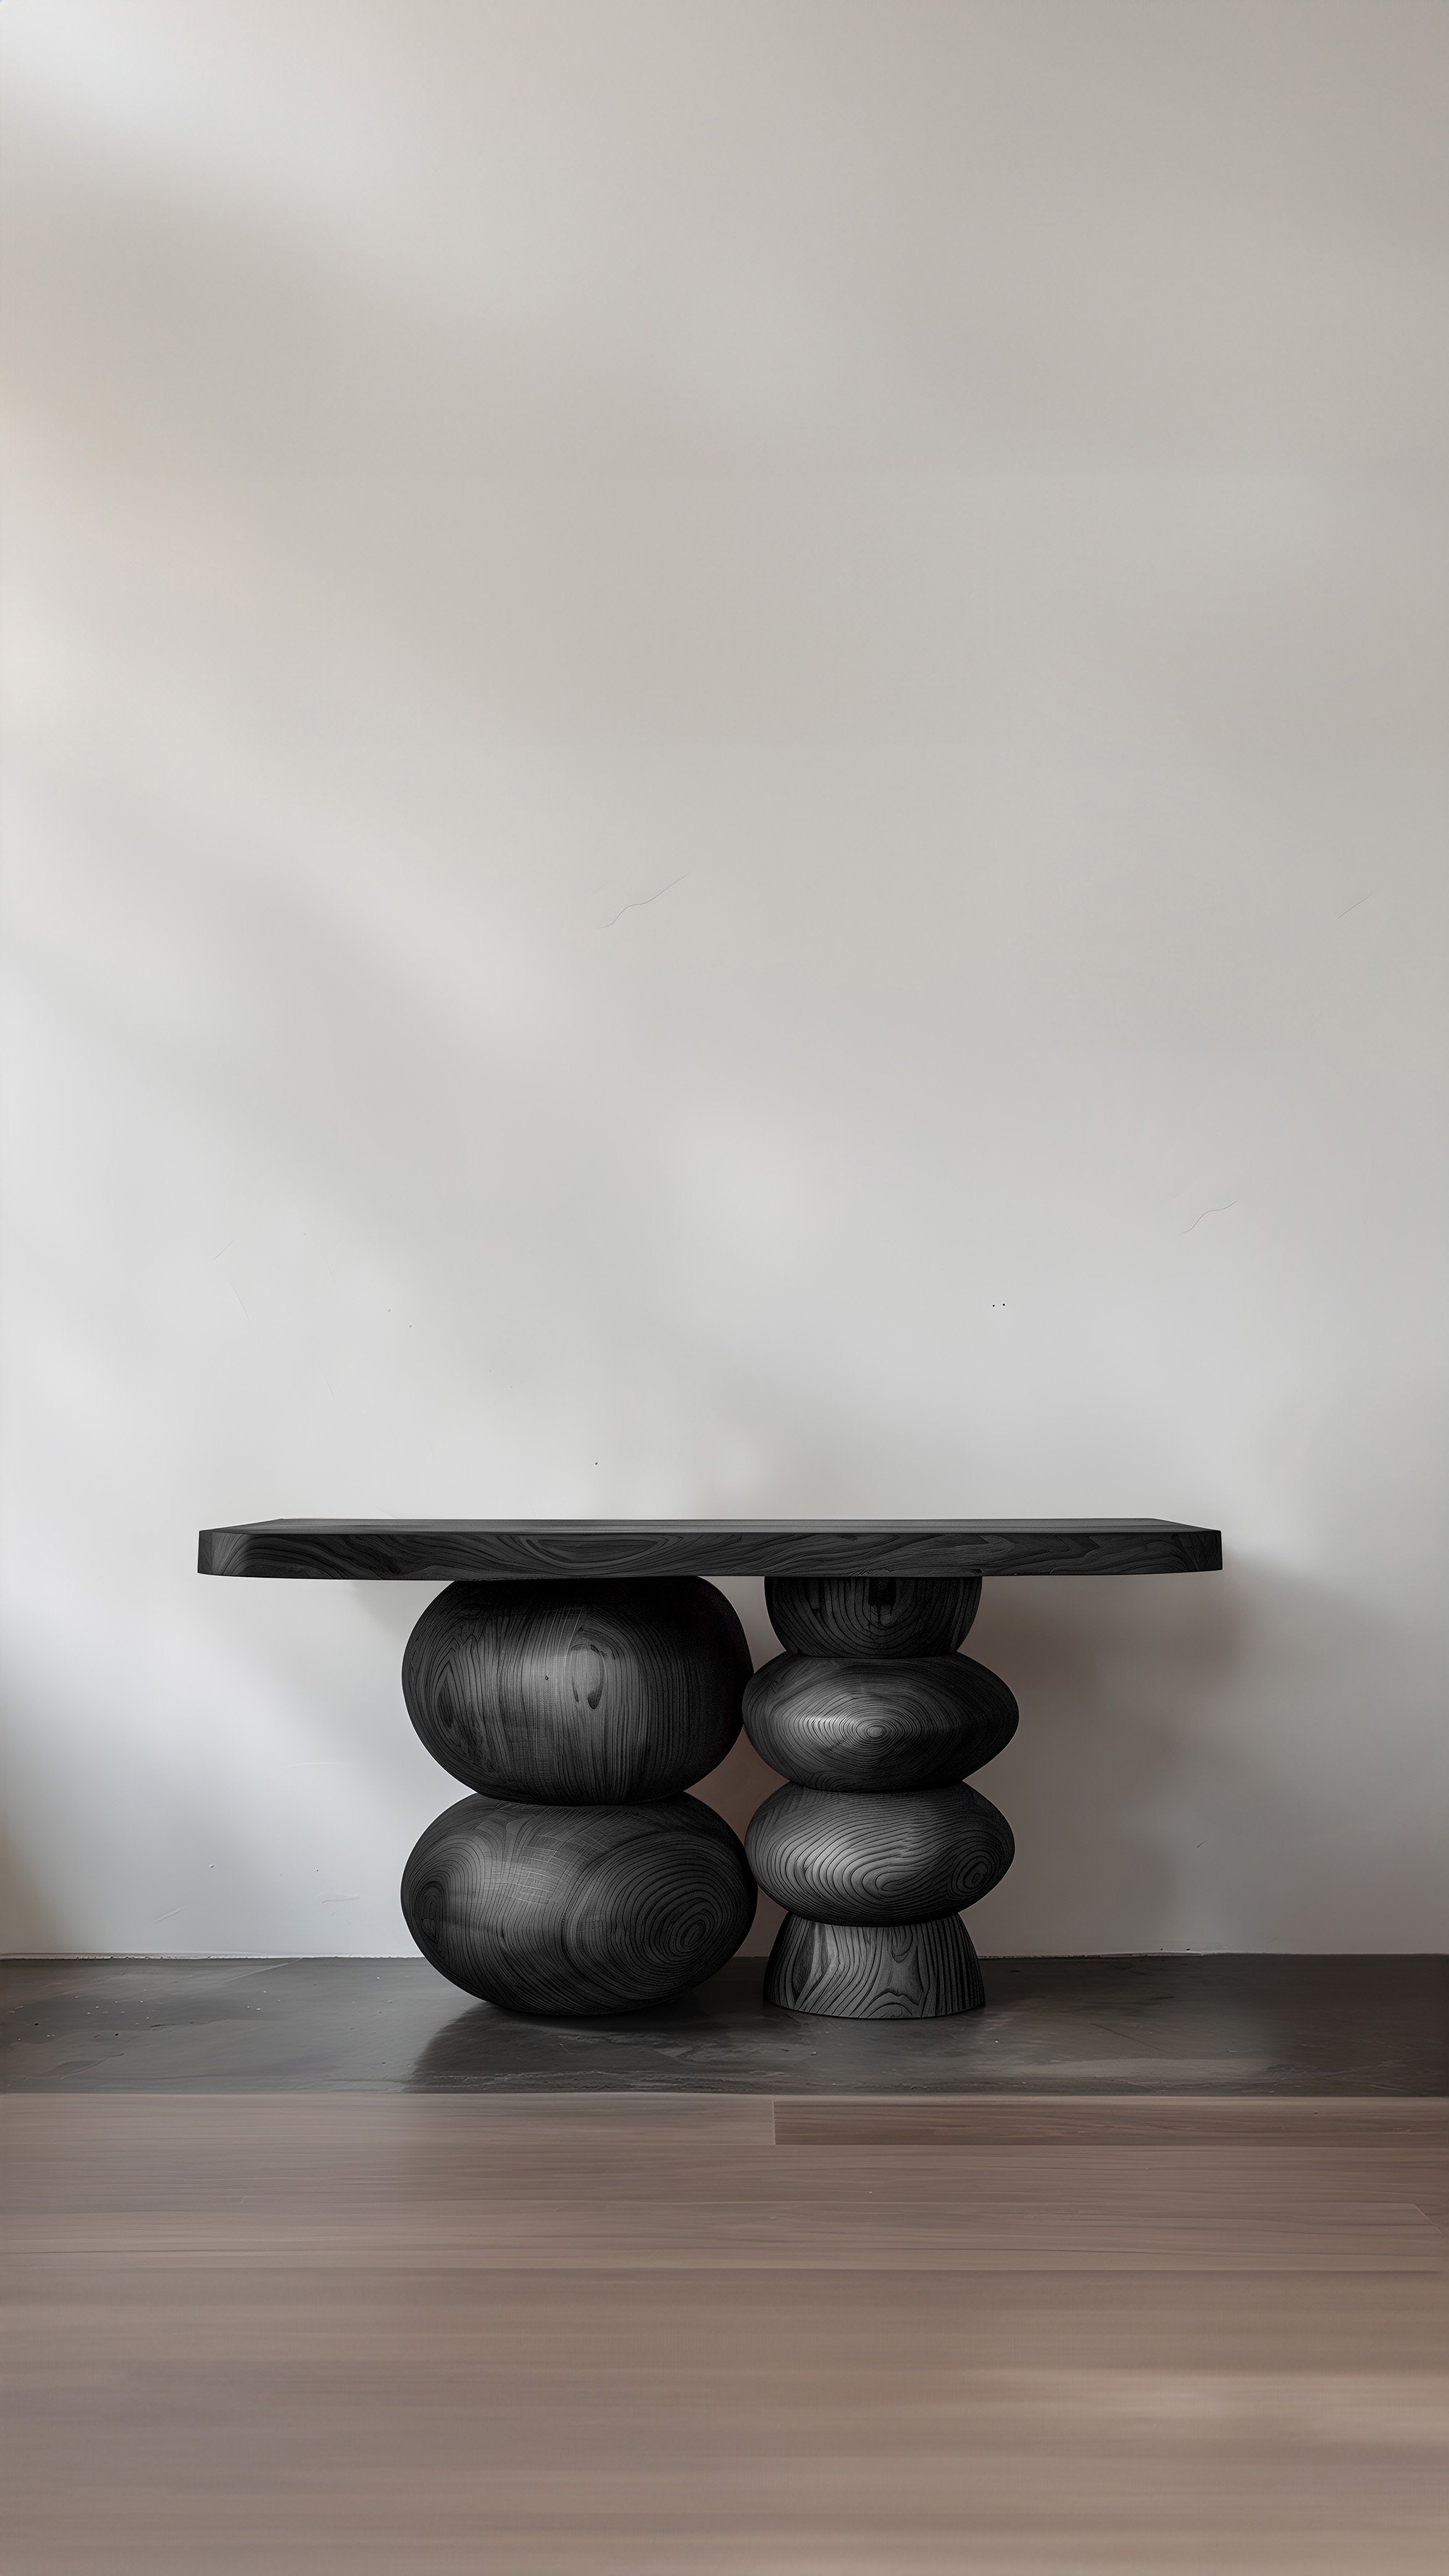 Elefante Console Table 39 by NONO, Stacked Black Wood, Escalona's Touch — 4.jpg